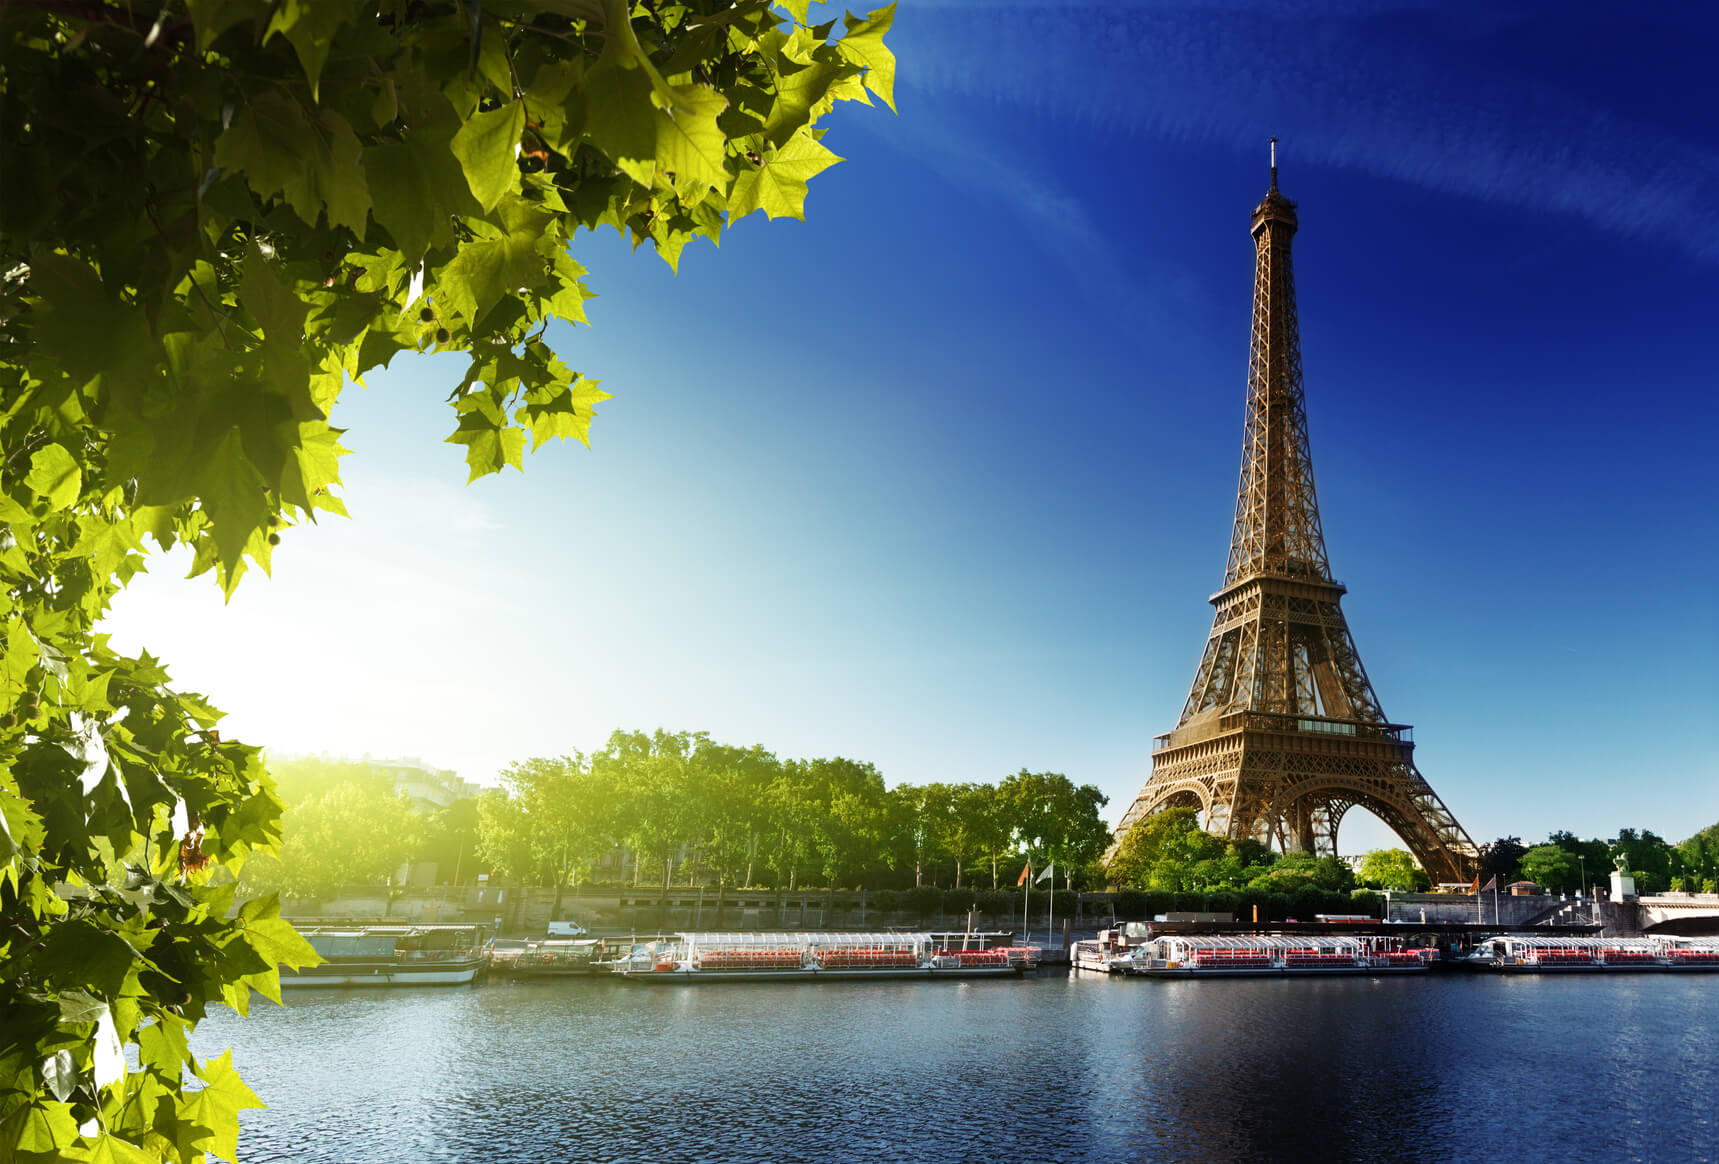 Flight deals from US cities to Paris, France | Secret Flying